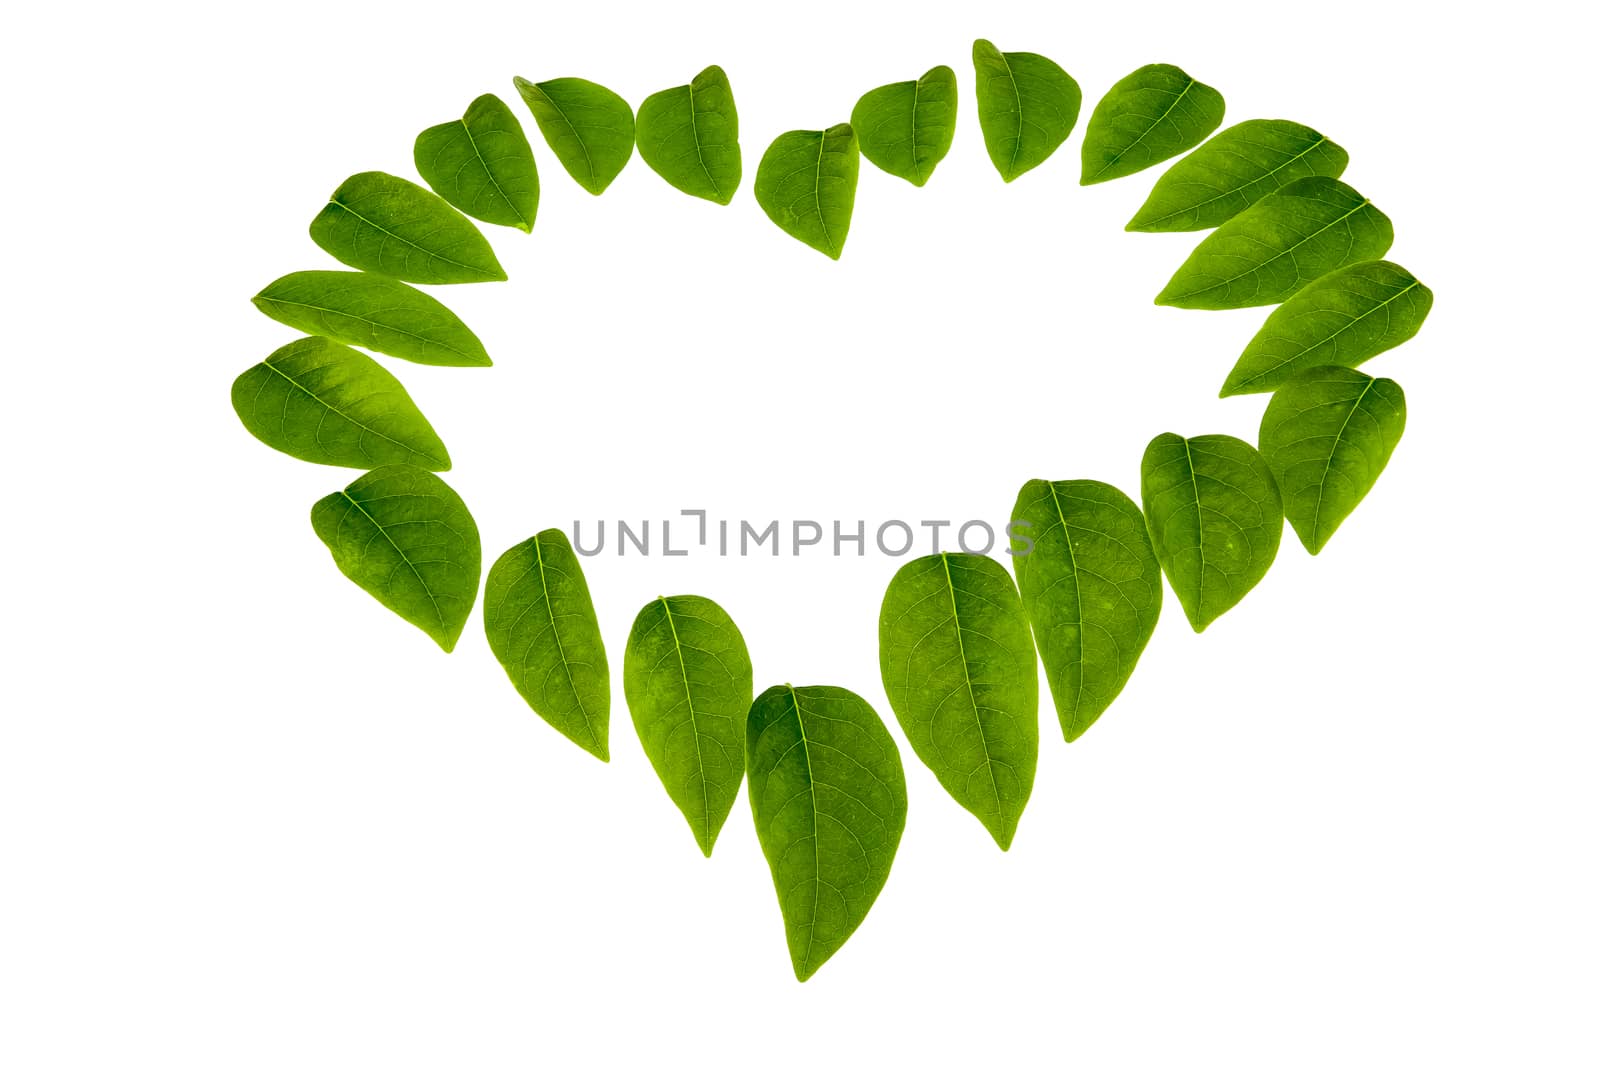 Star gooseberry leaf isolated on a white background